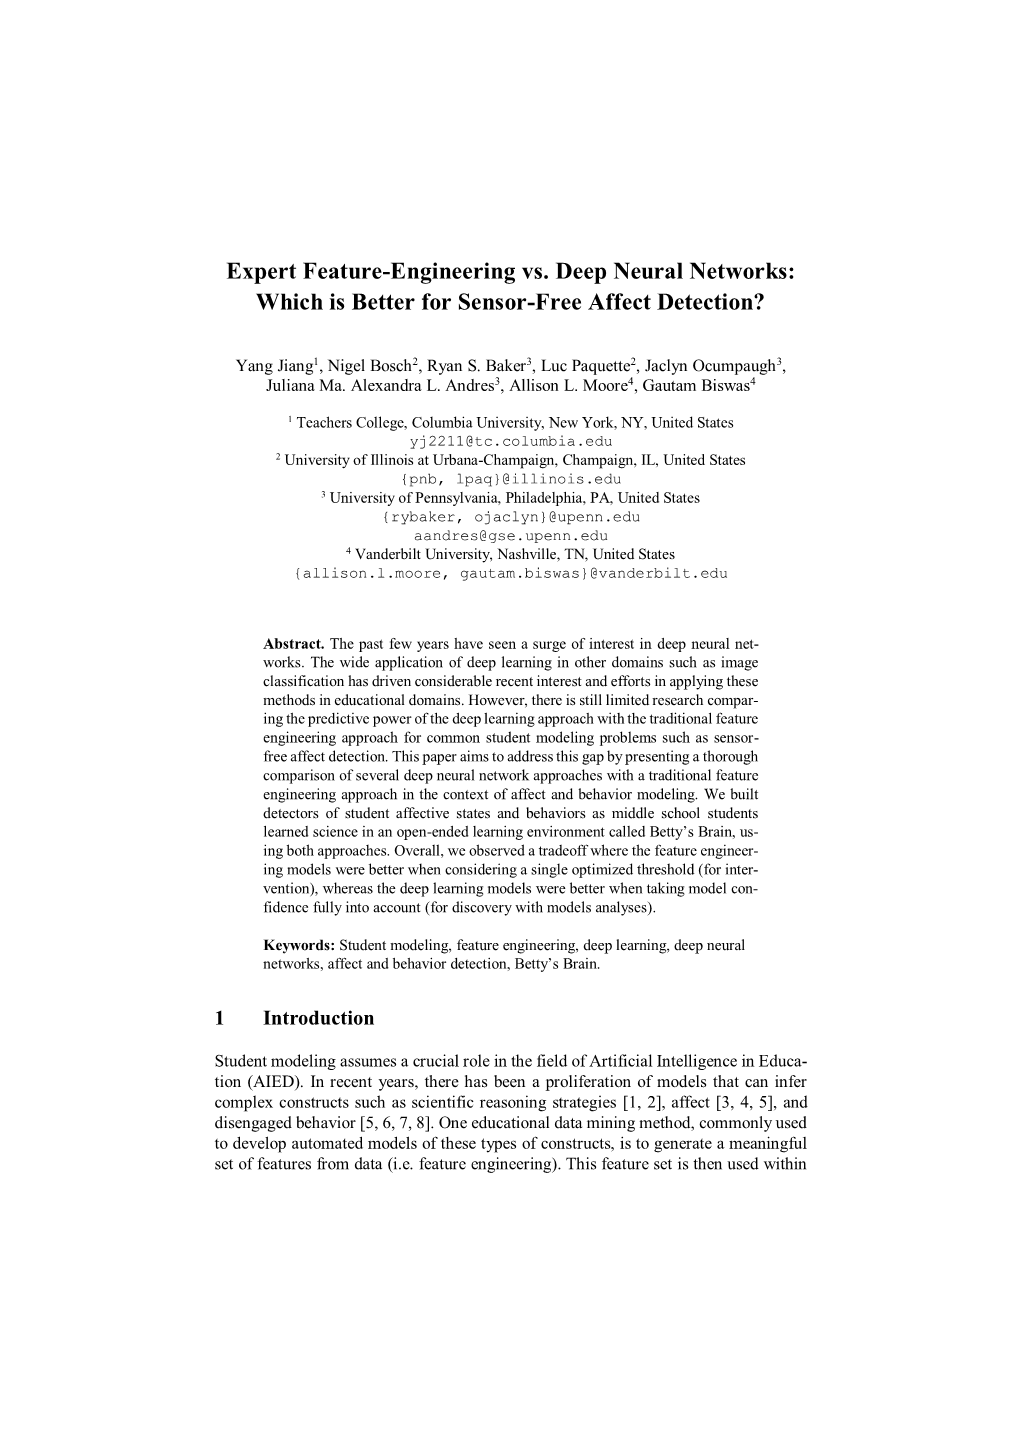 Expert Feature-Engineering Vs. Deep Neural Networks: Which Is Better for Sensor-Free Affect Detection?